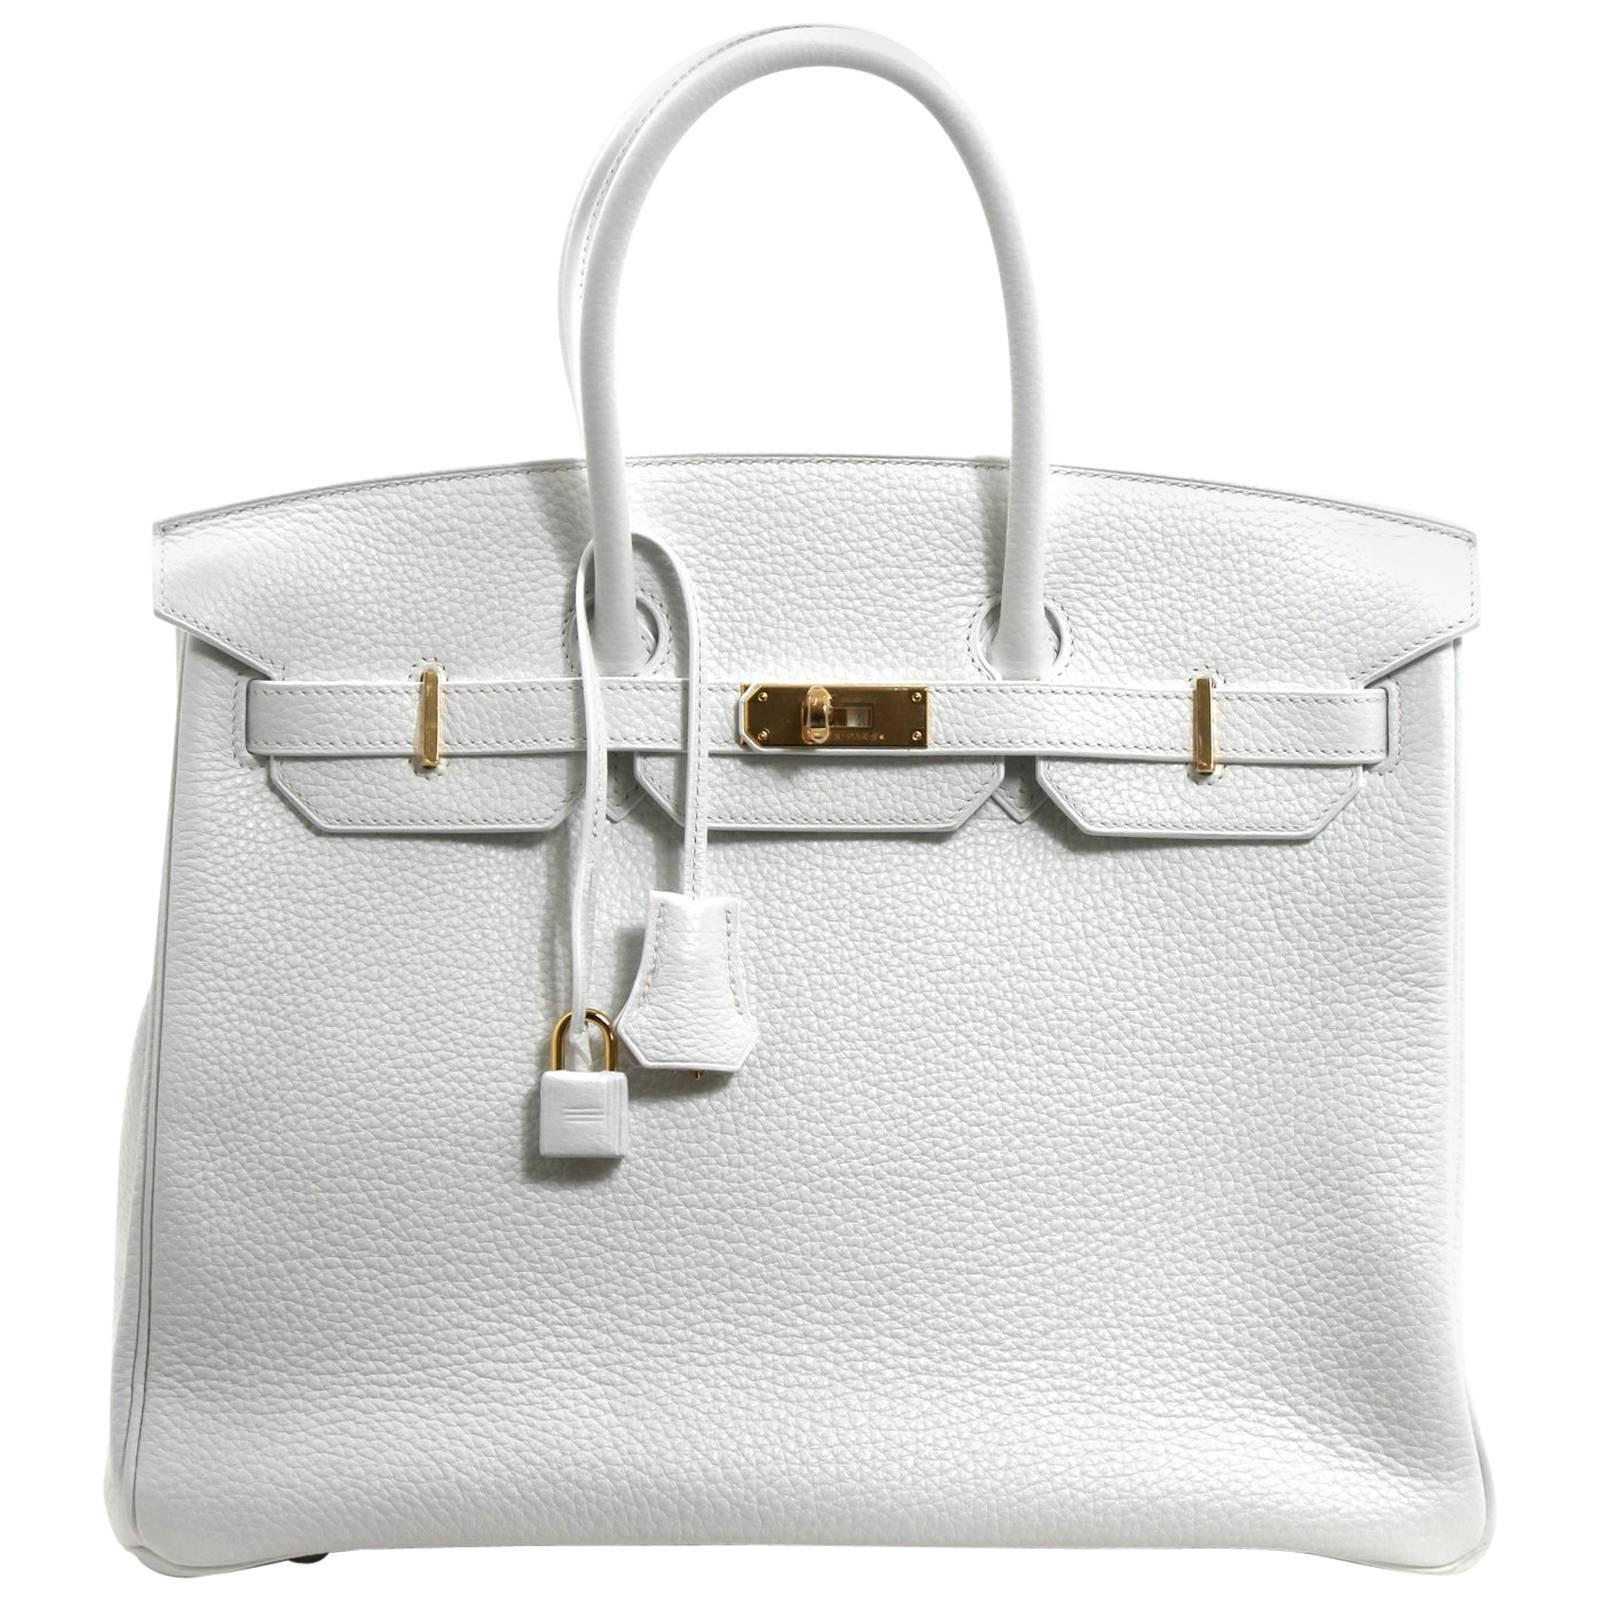 Hermès WHITE Clemence Birkin Bag- 35 cm with GHW, T stamp For Sale